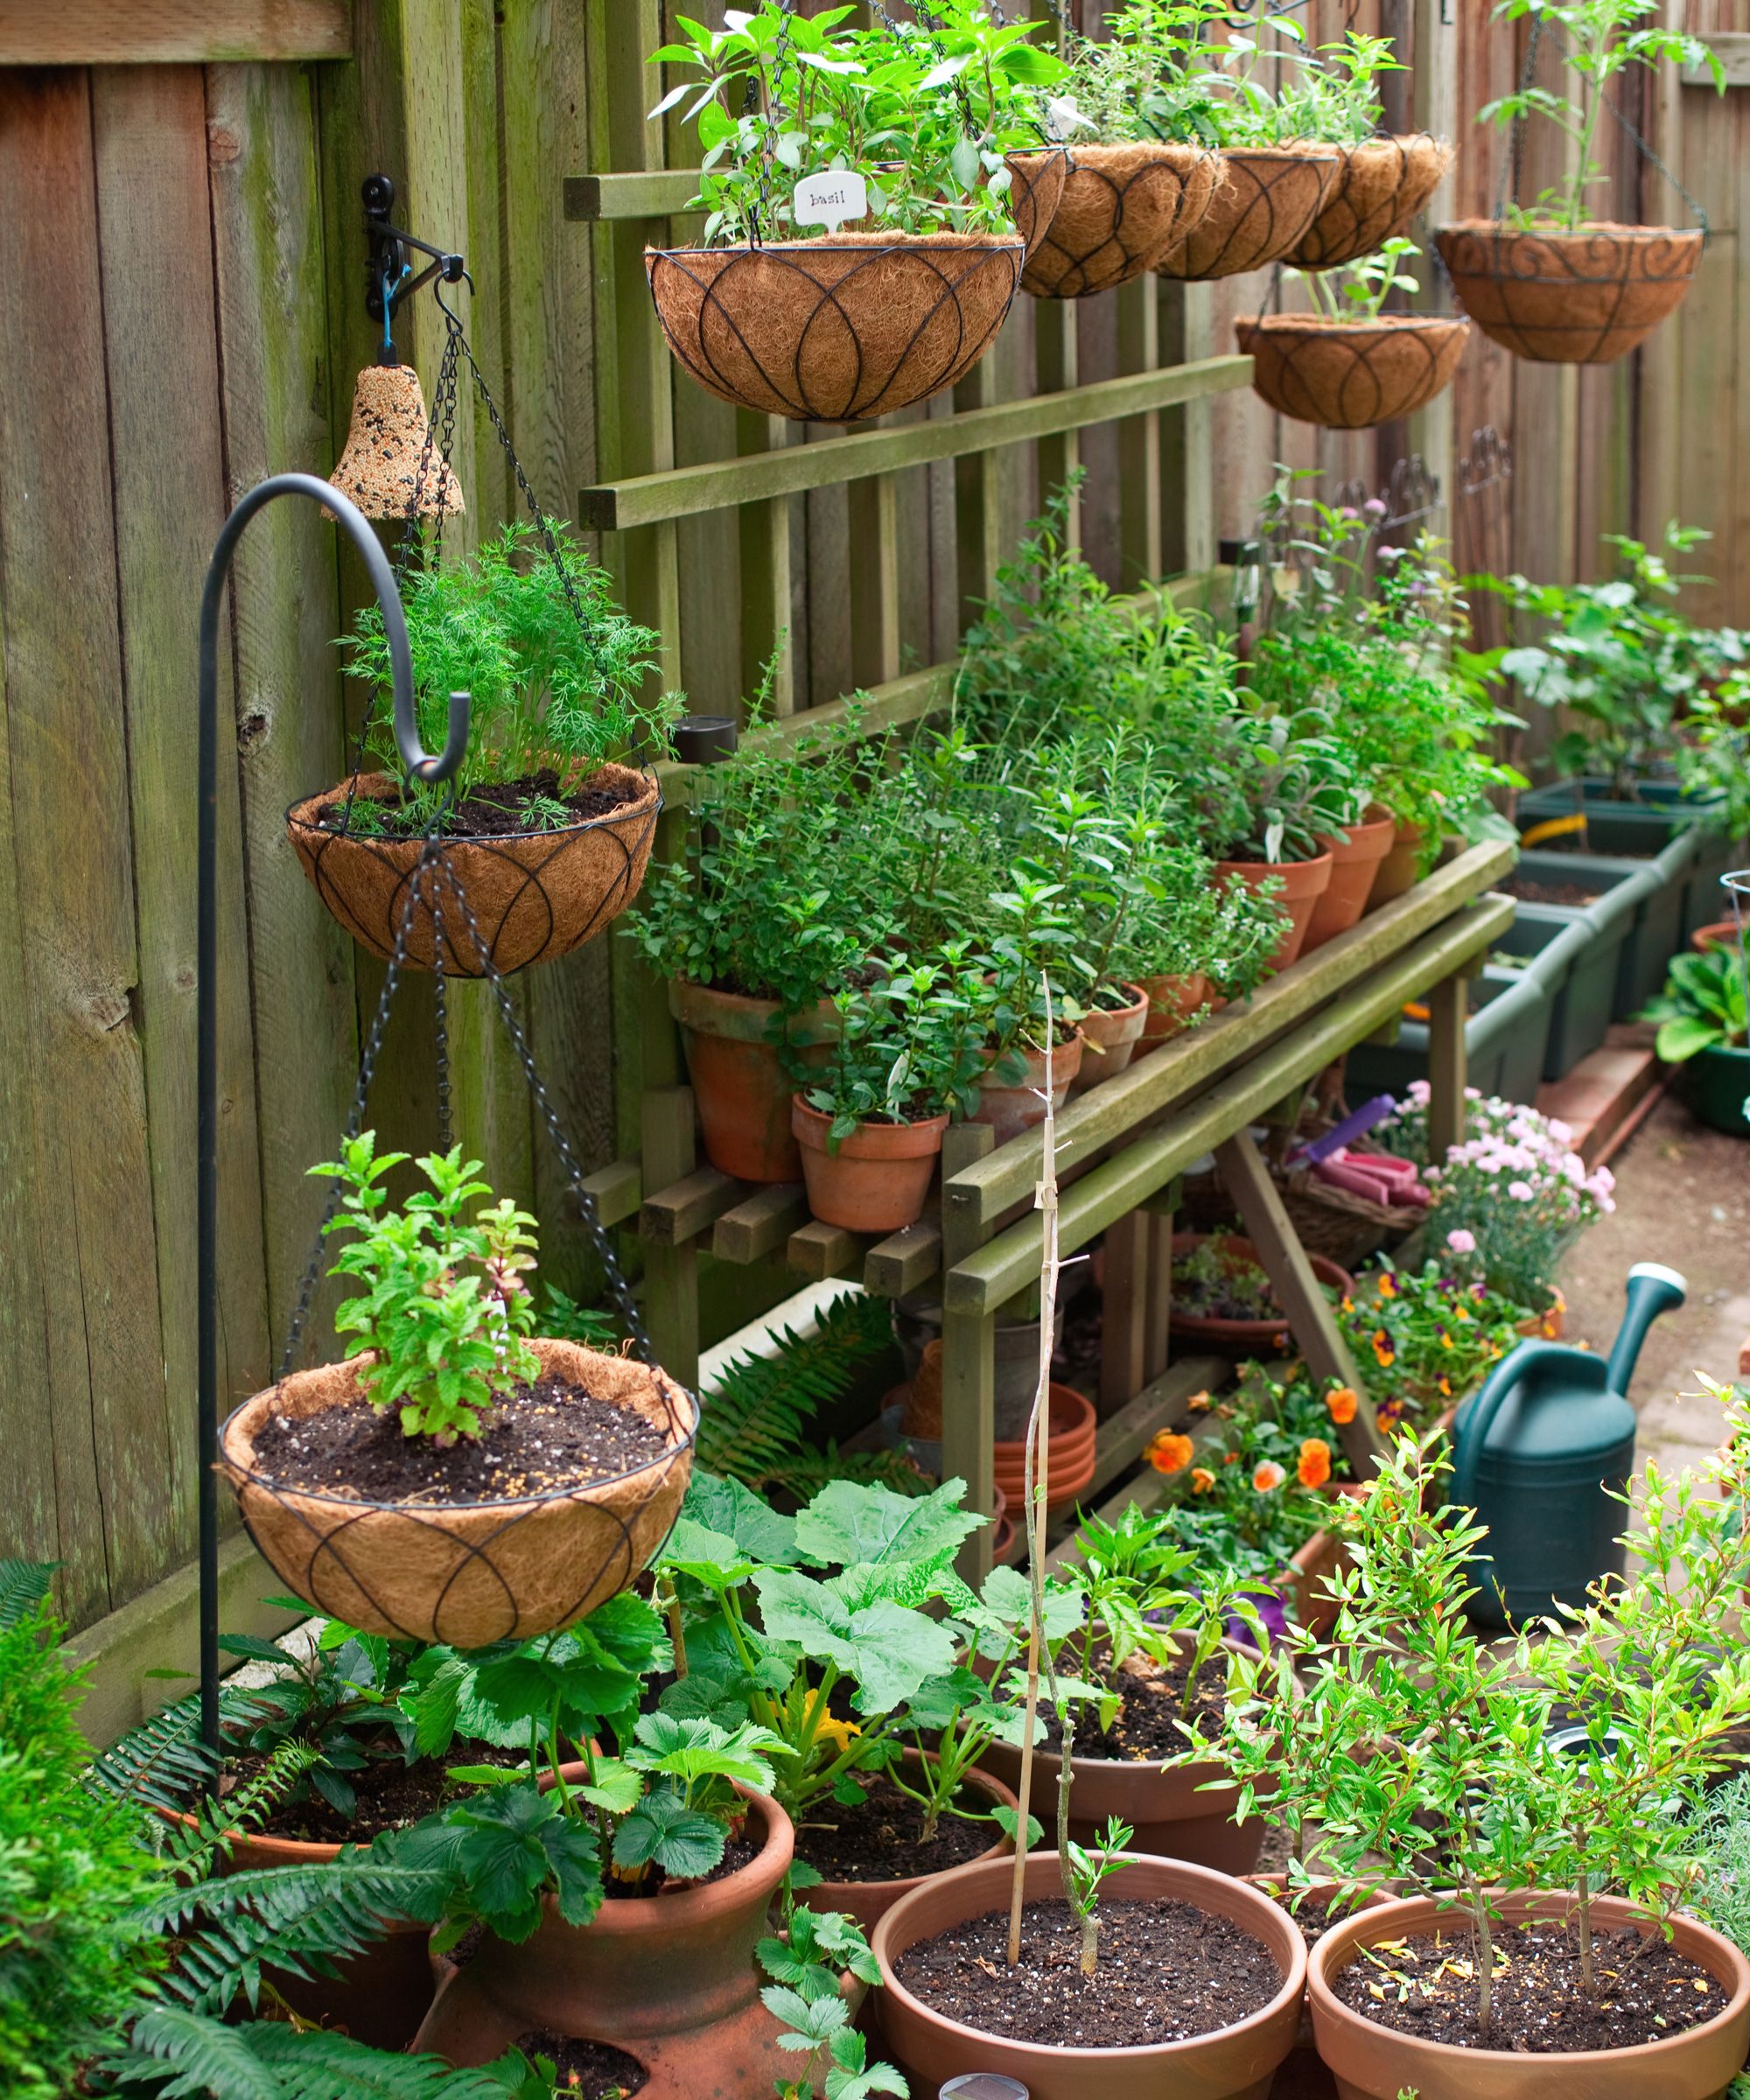 Growing a Variety of Vegetables in a Cozy Garden Space